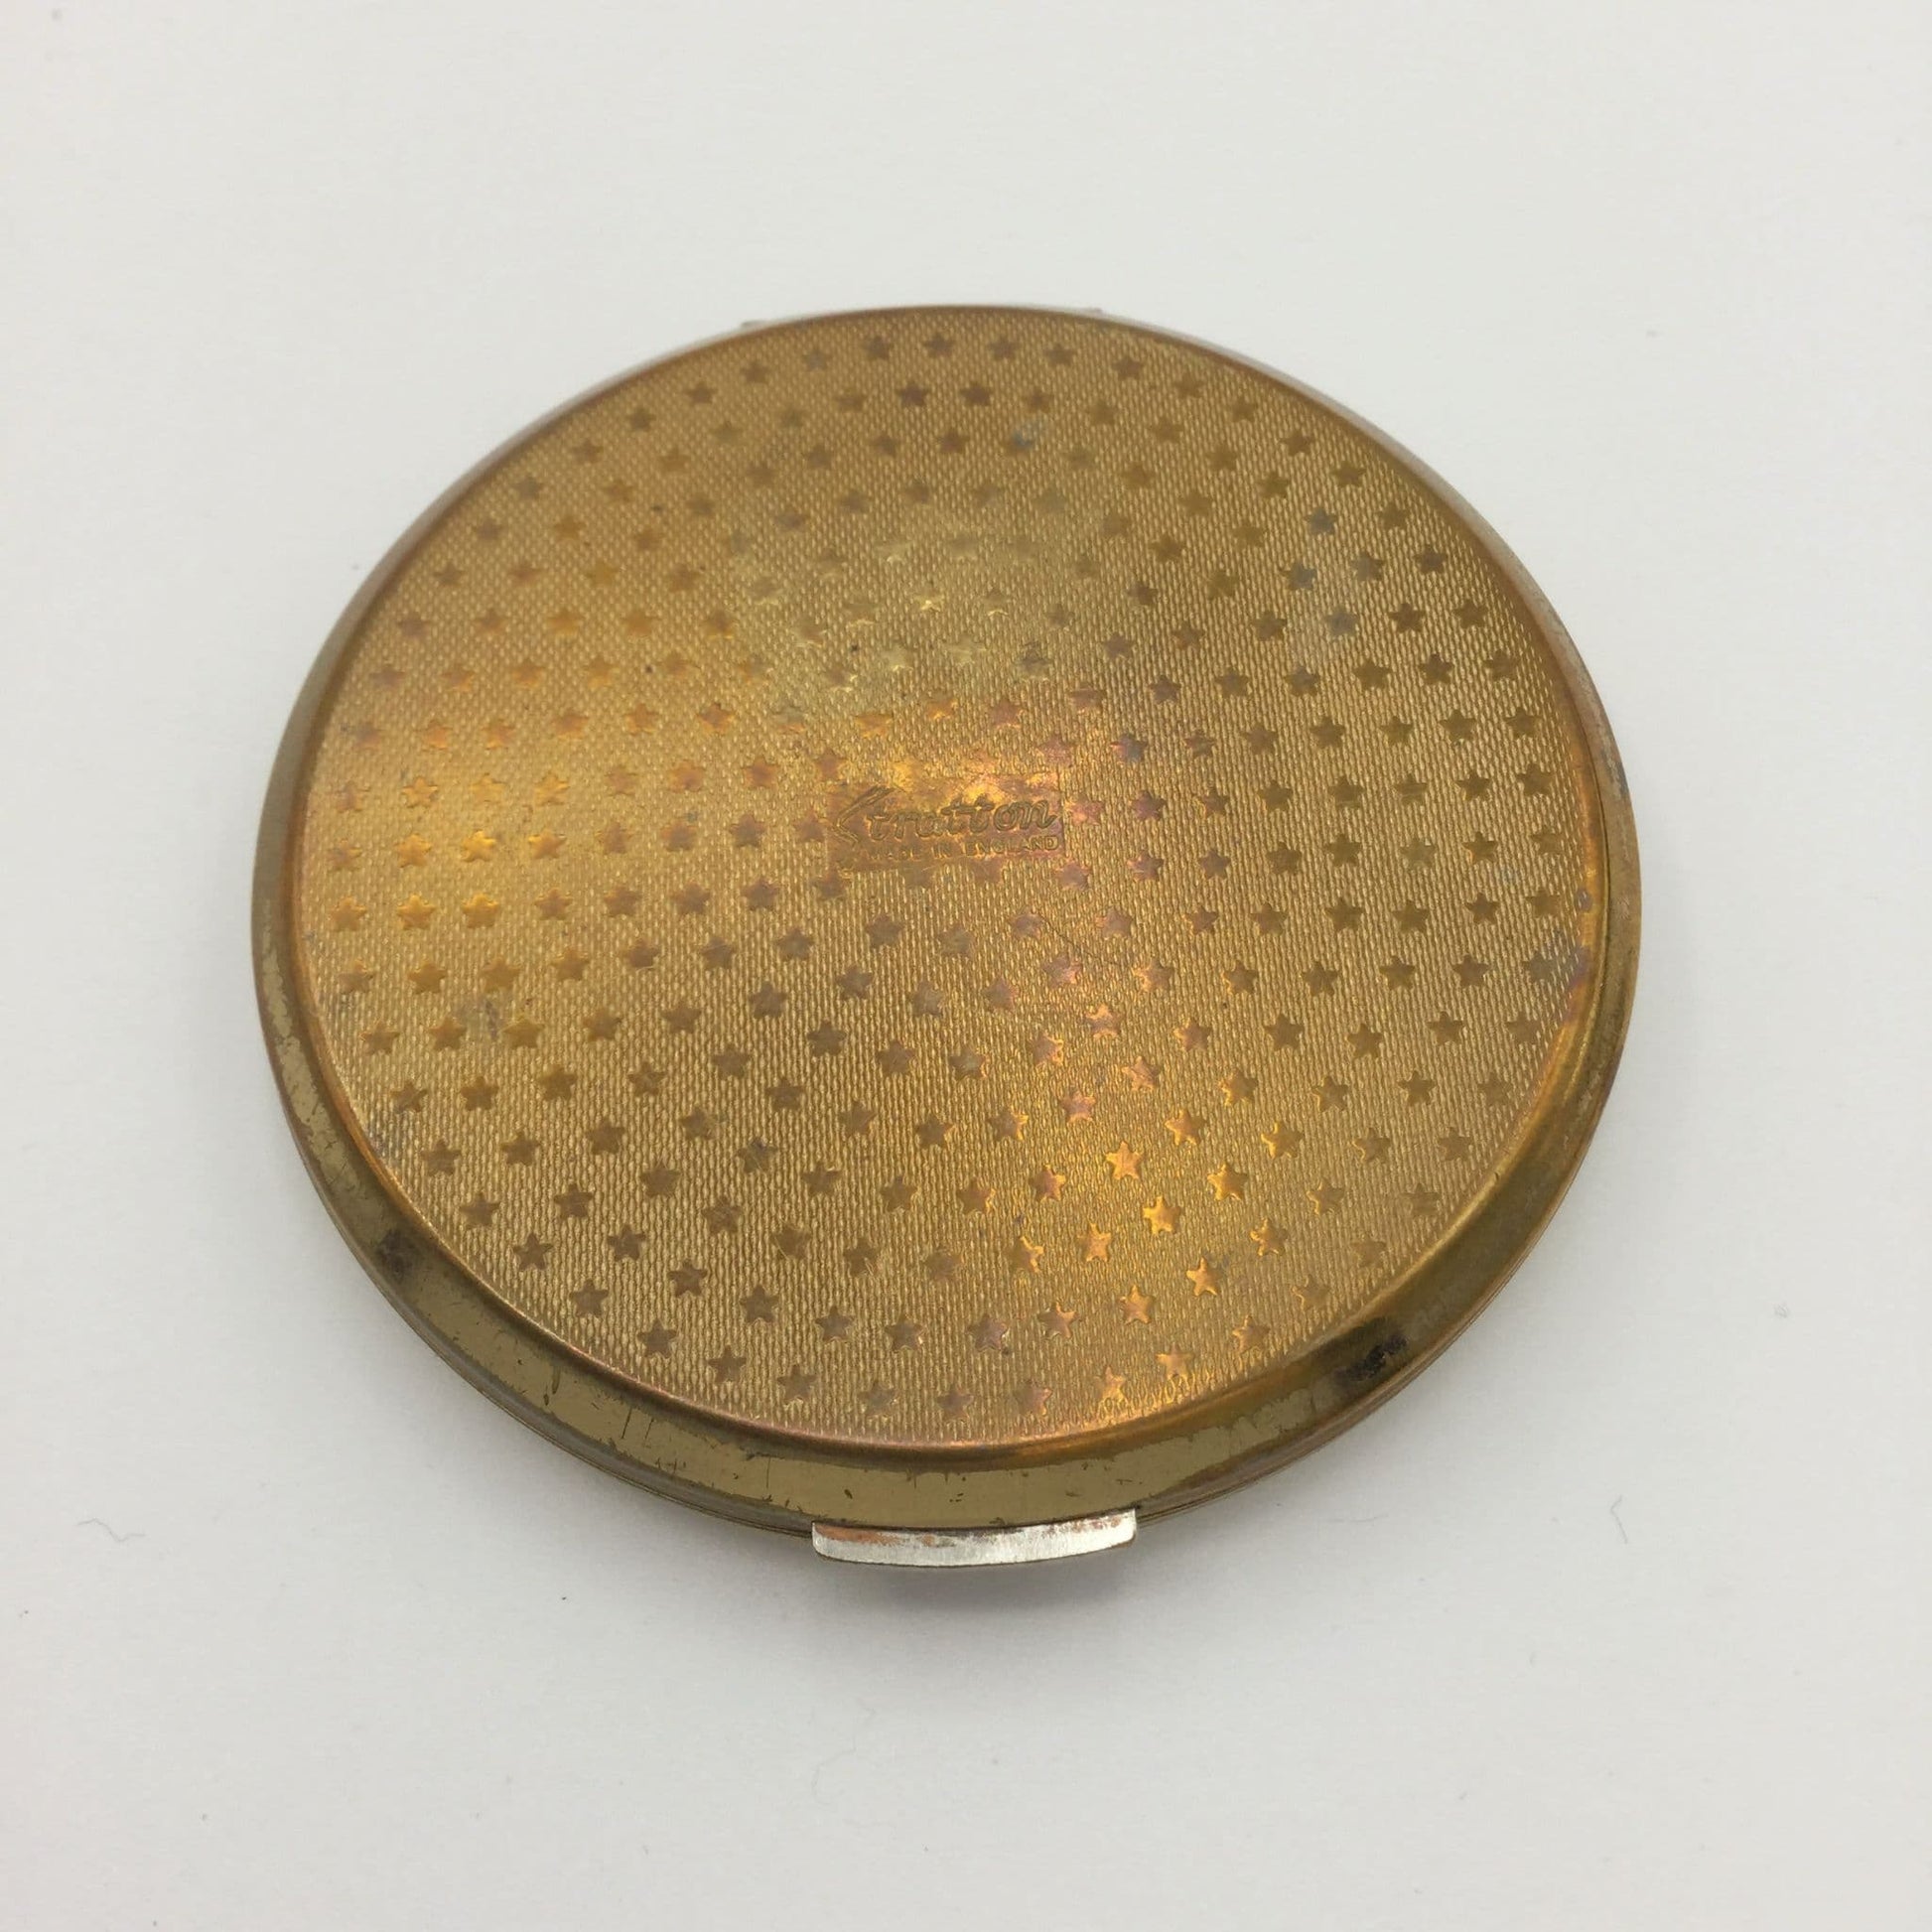 1960s gold mirror compact base showing a stars design with Stratton in the centre